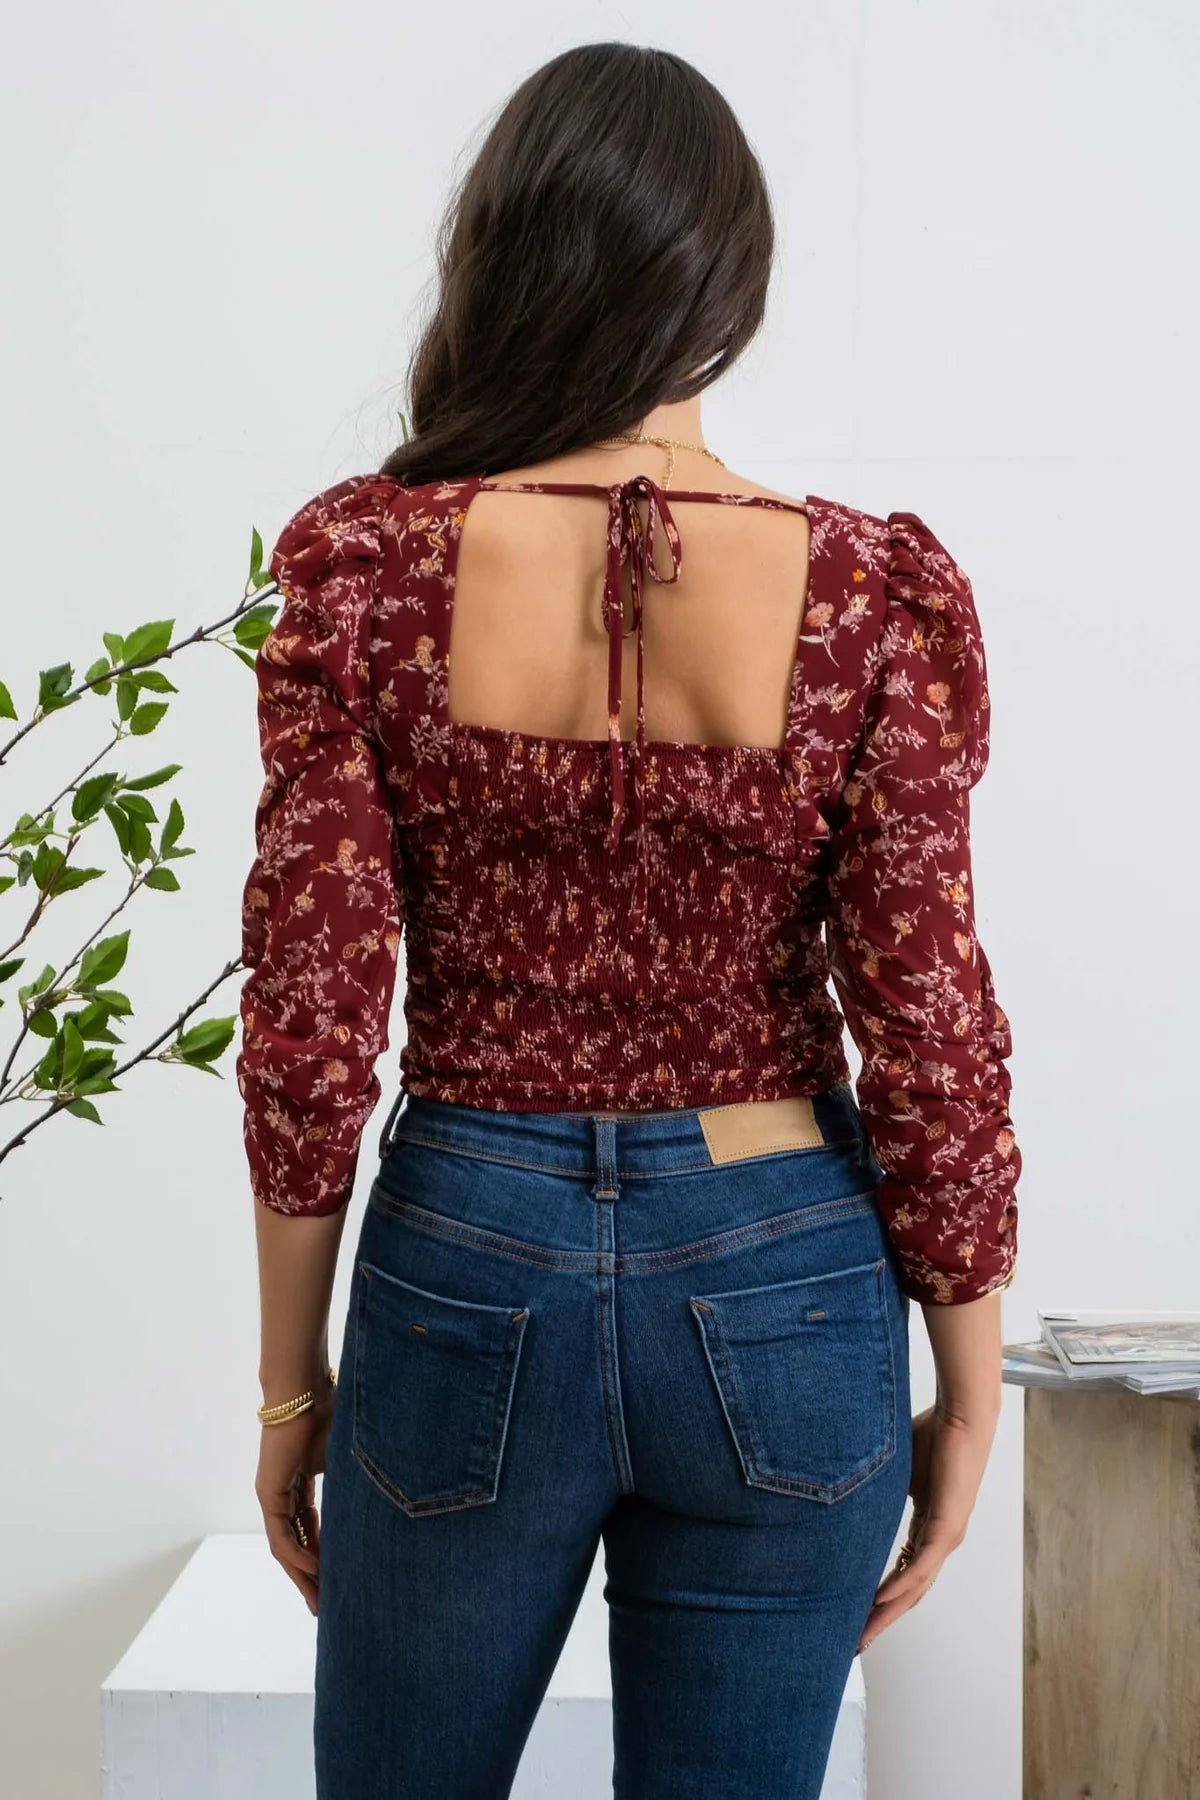 Buy RARE Maroon Floral Top With Cuffed Sleeves - Tops for Women 12364798